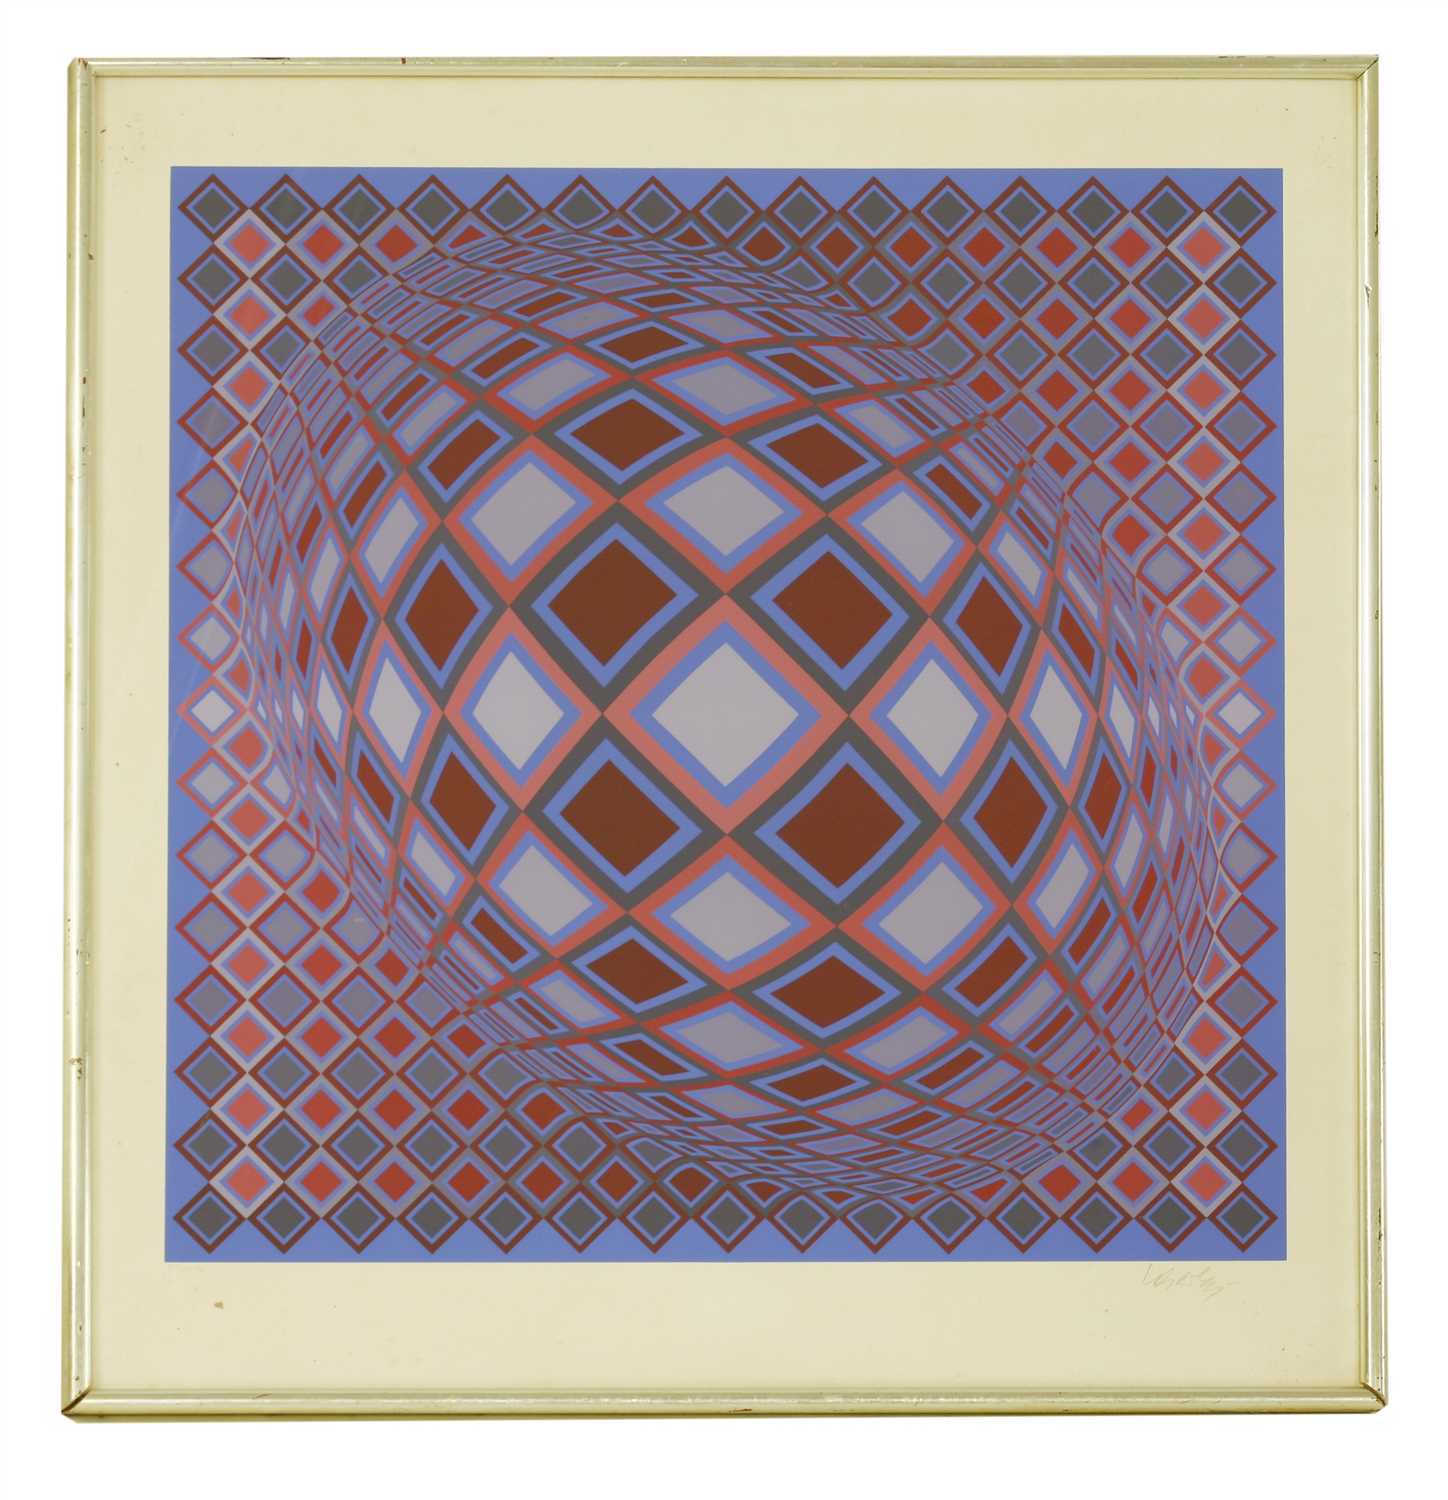 Lot 42 - Victor Vasarely (1906-1997)